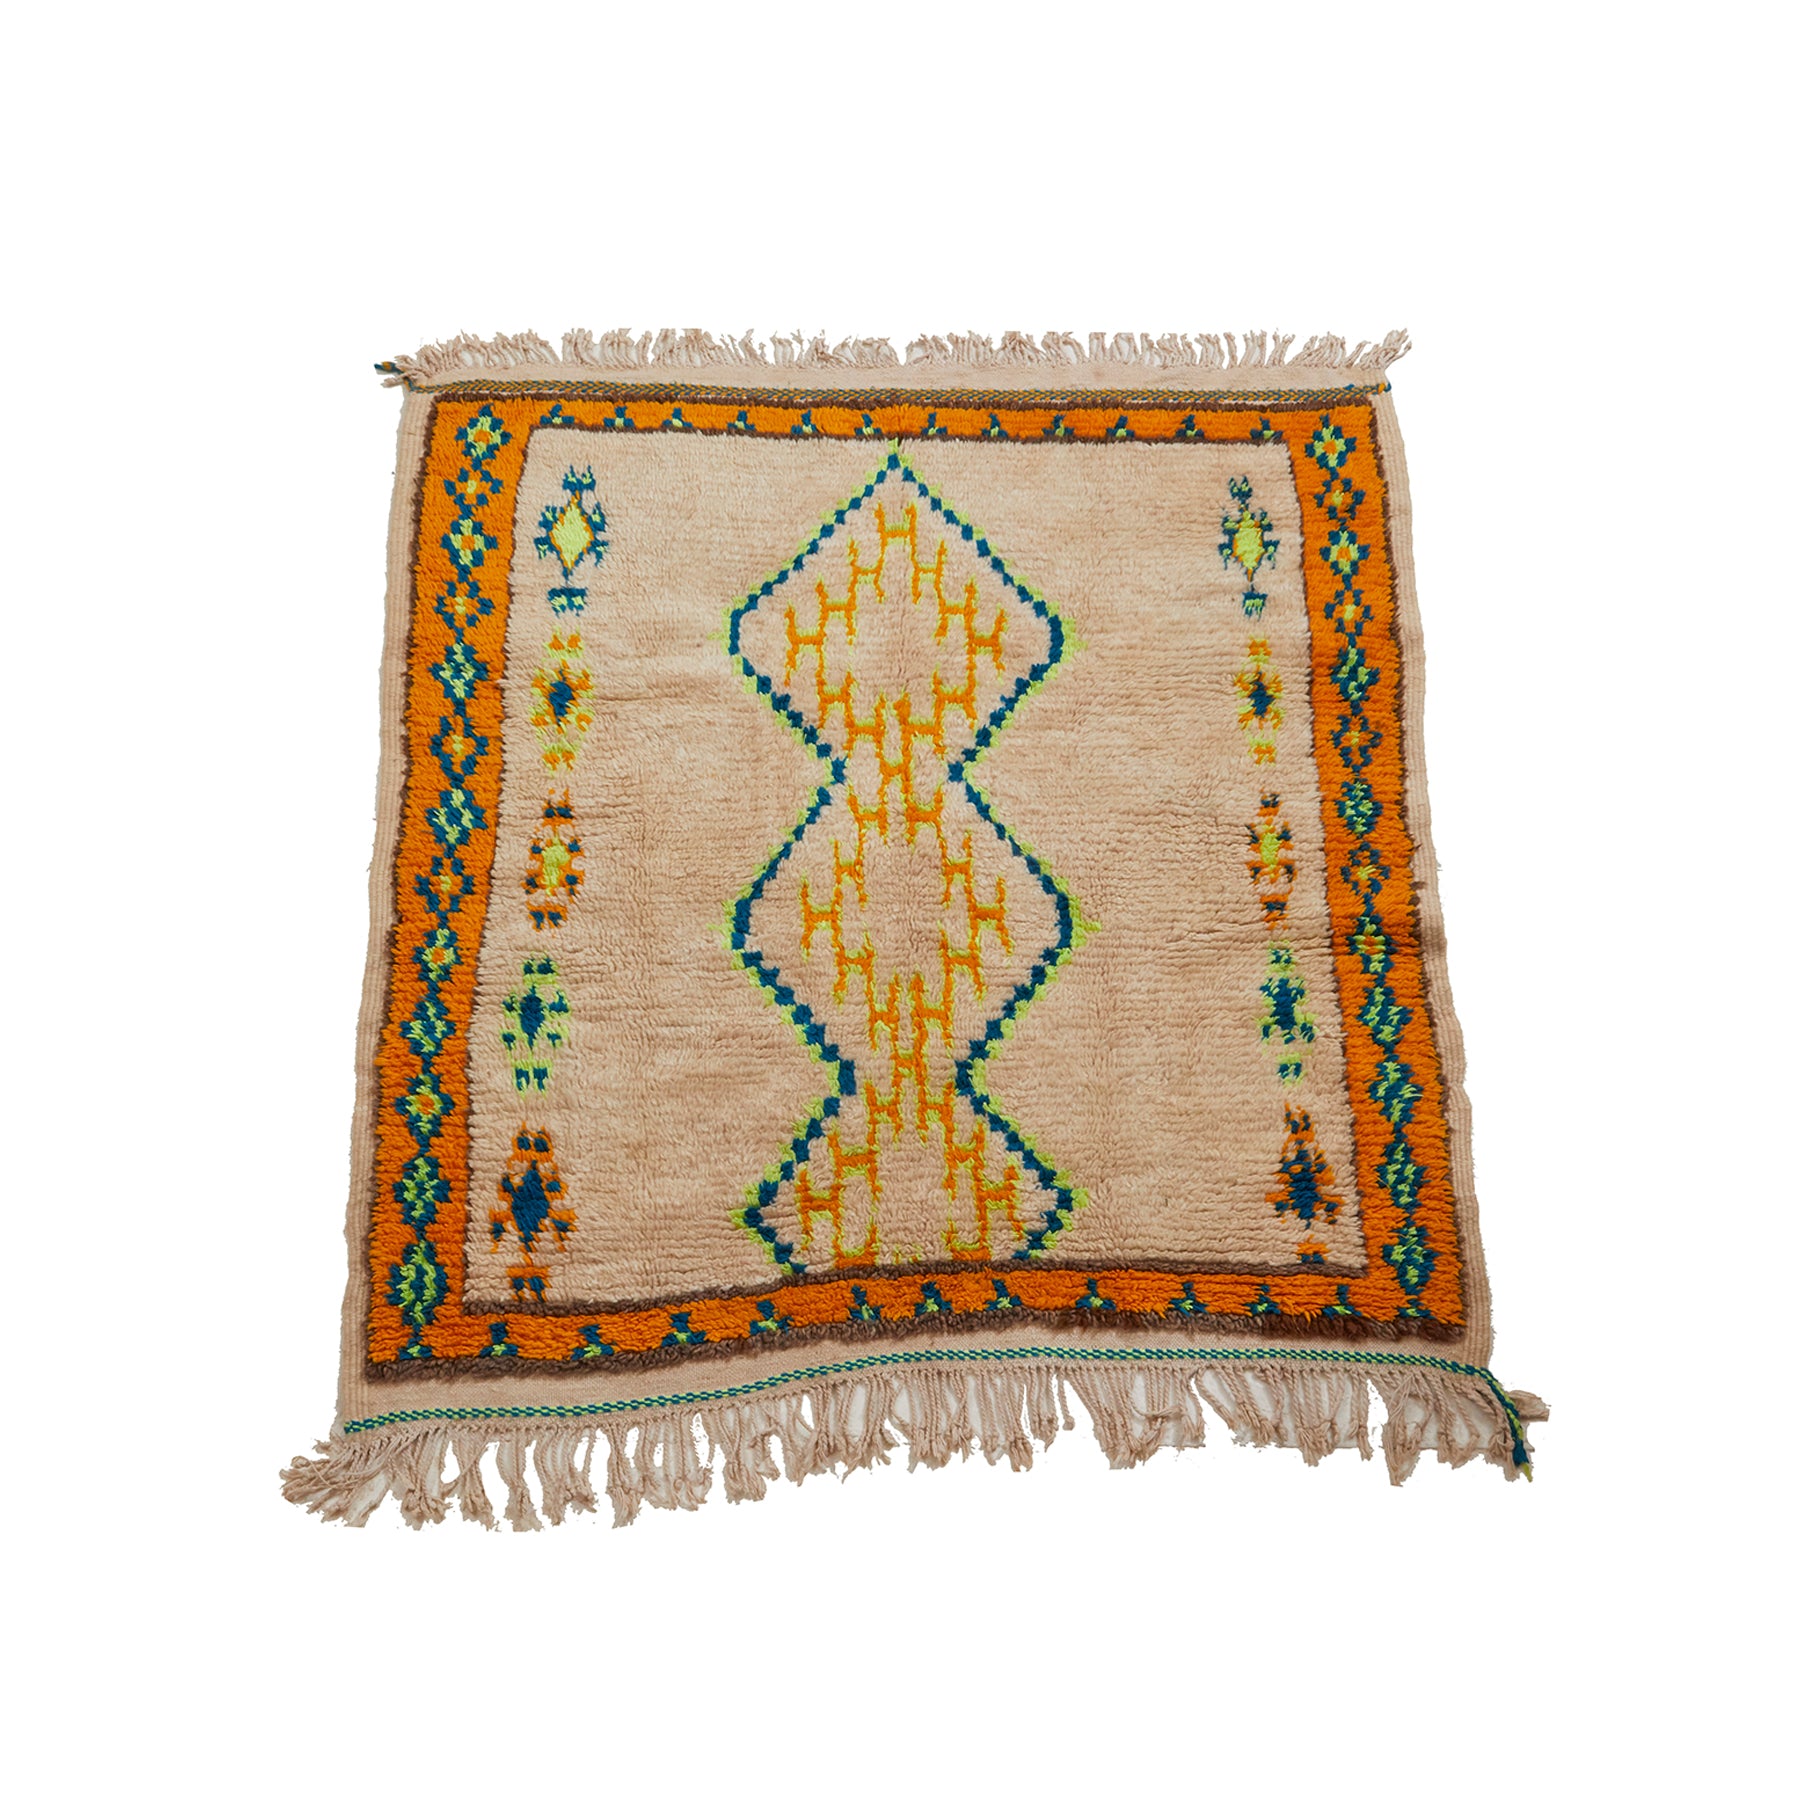 White geometric Moroccan Azilal throw rug with colorful details - Kantara | Moroccan Rugs